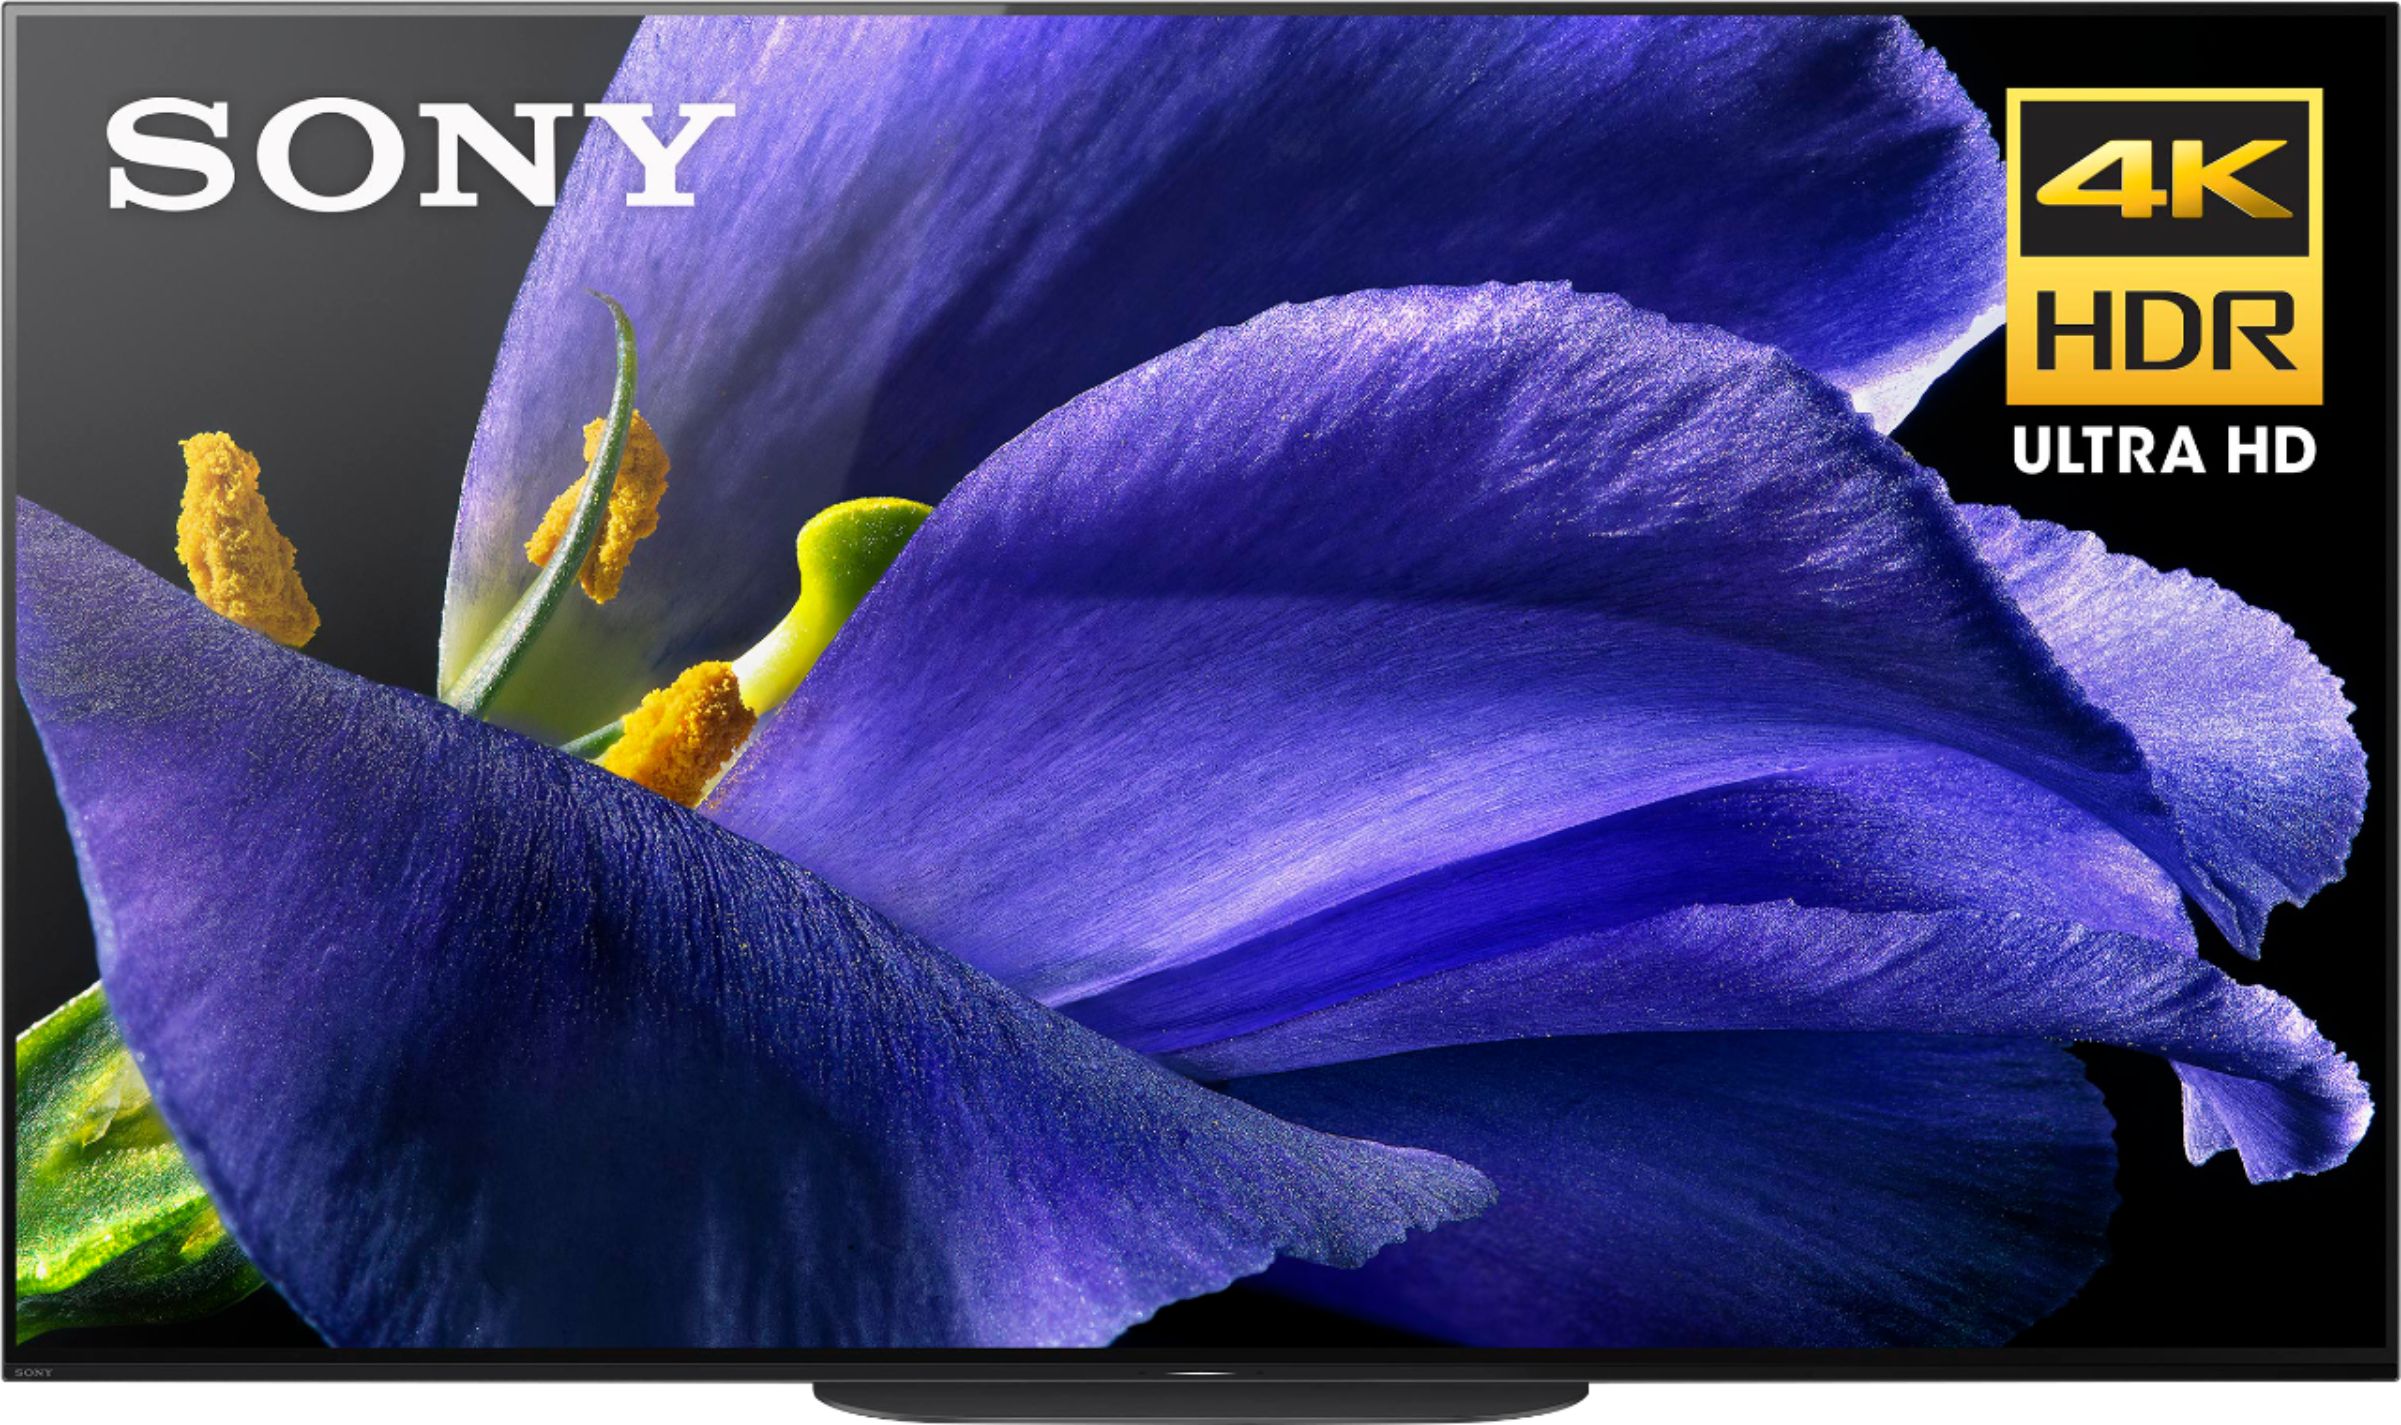 Sony - 55" Class - OLED - A9G MASTER Series - 2160p - Smart - 4K UHD TV with HDR